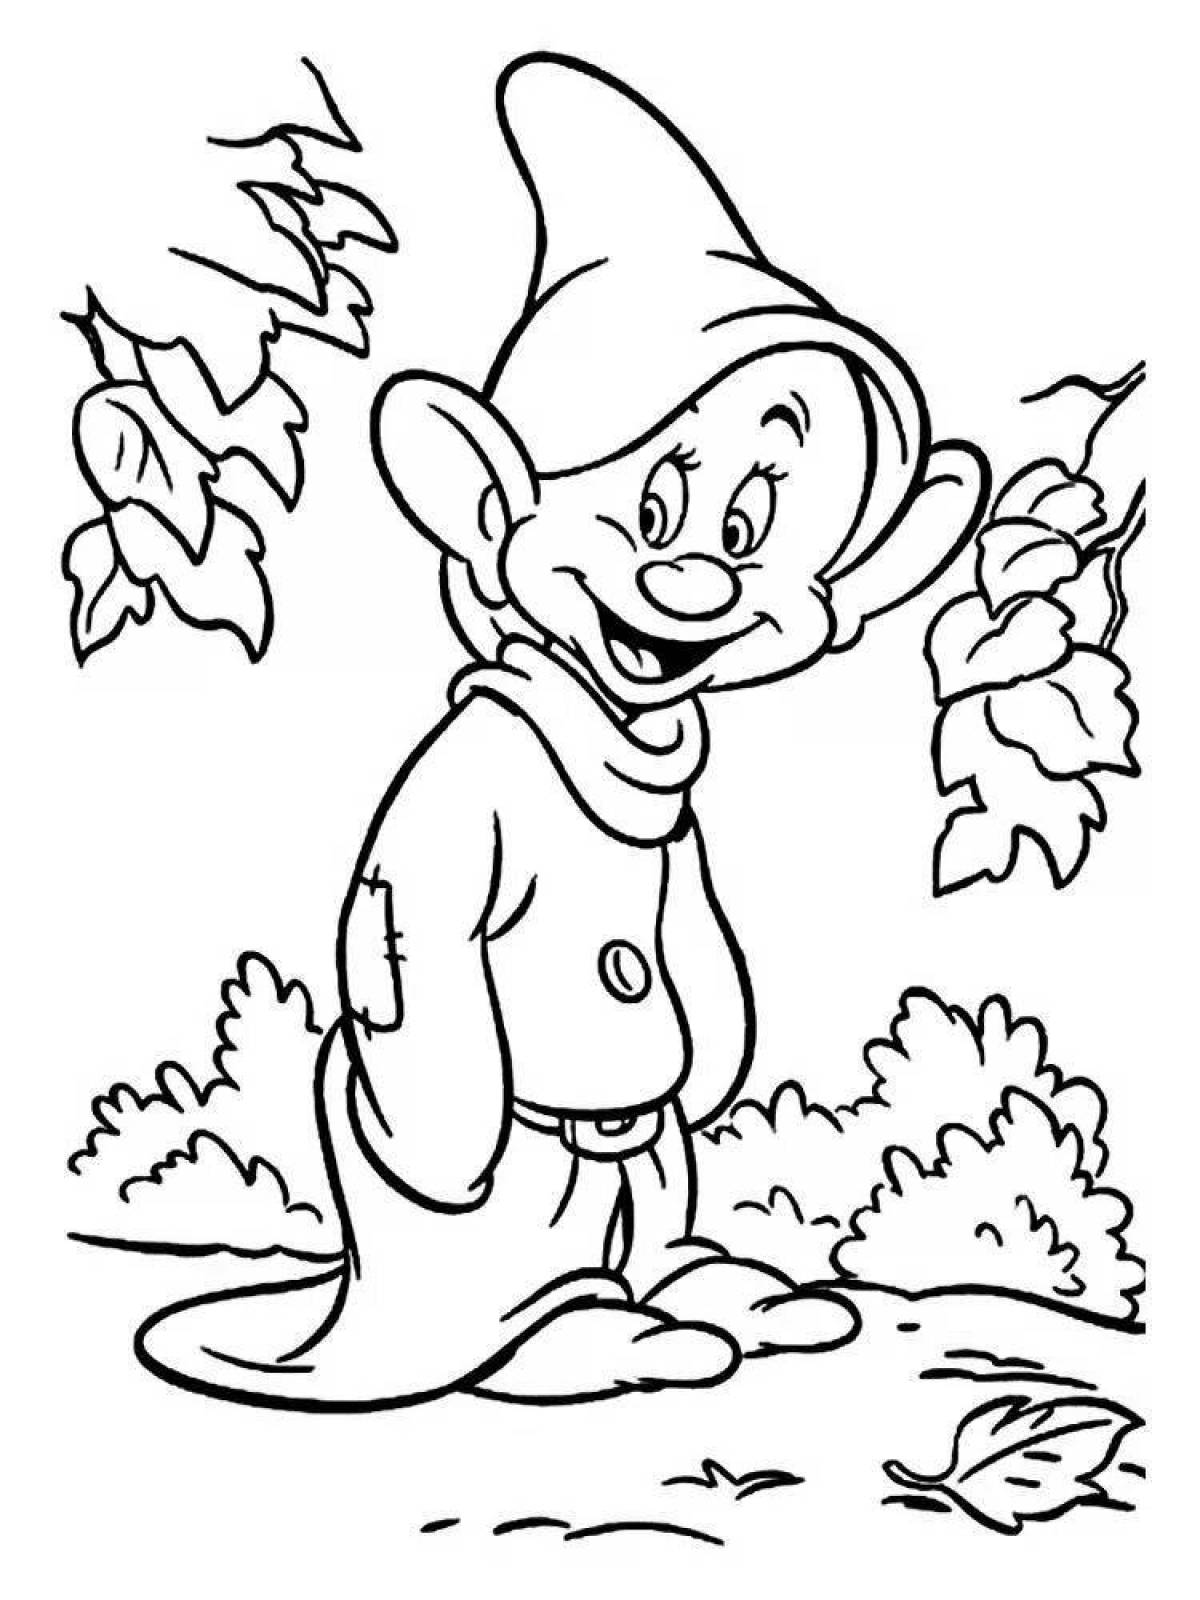 Charm coloring page 7 gnomes